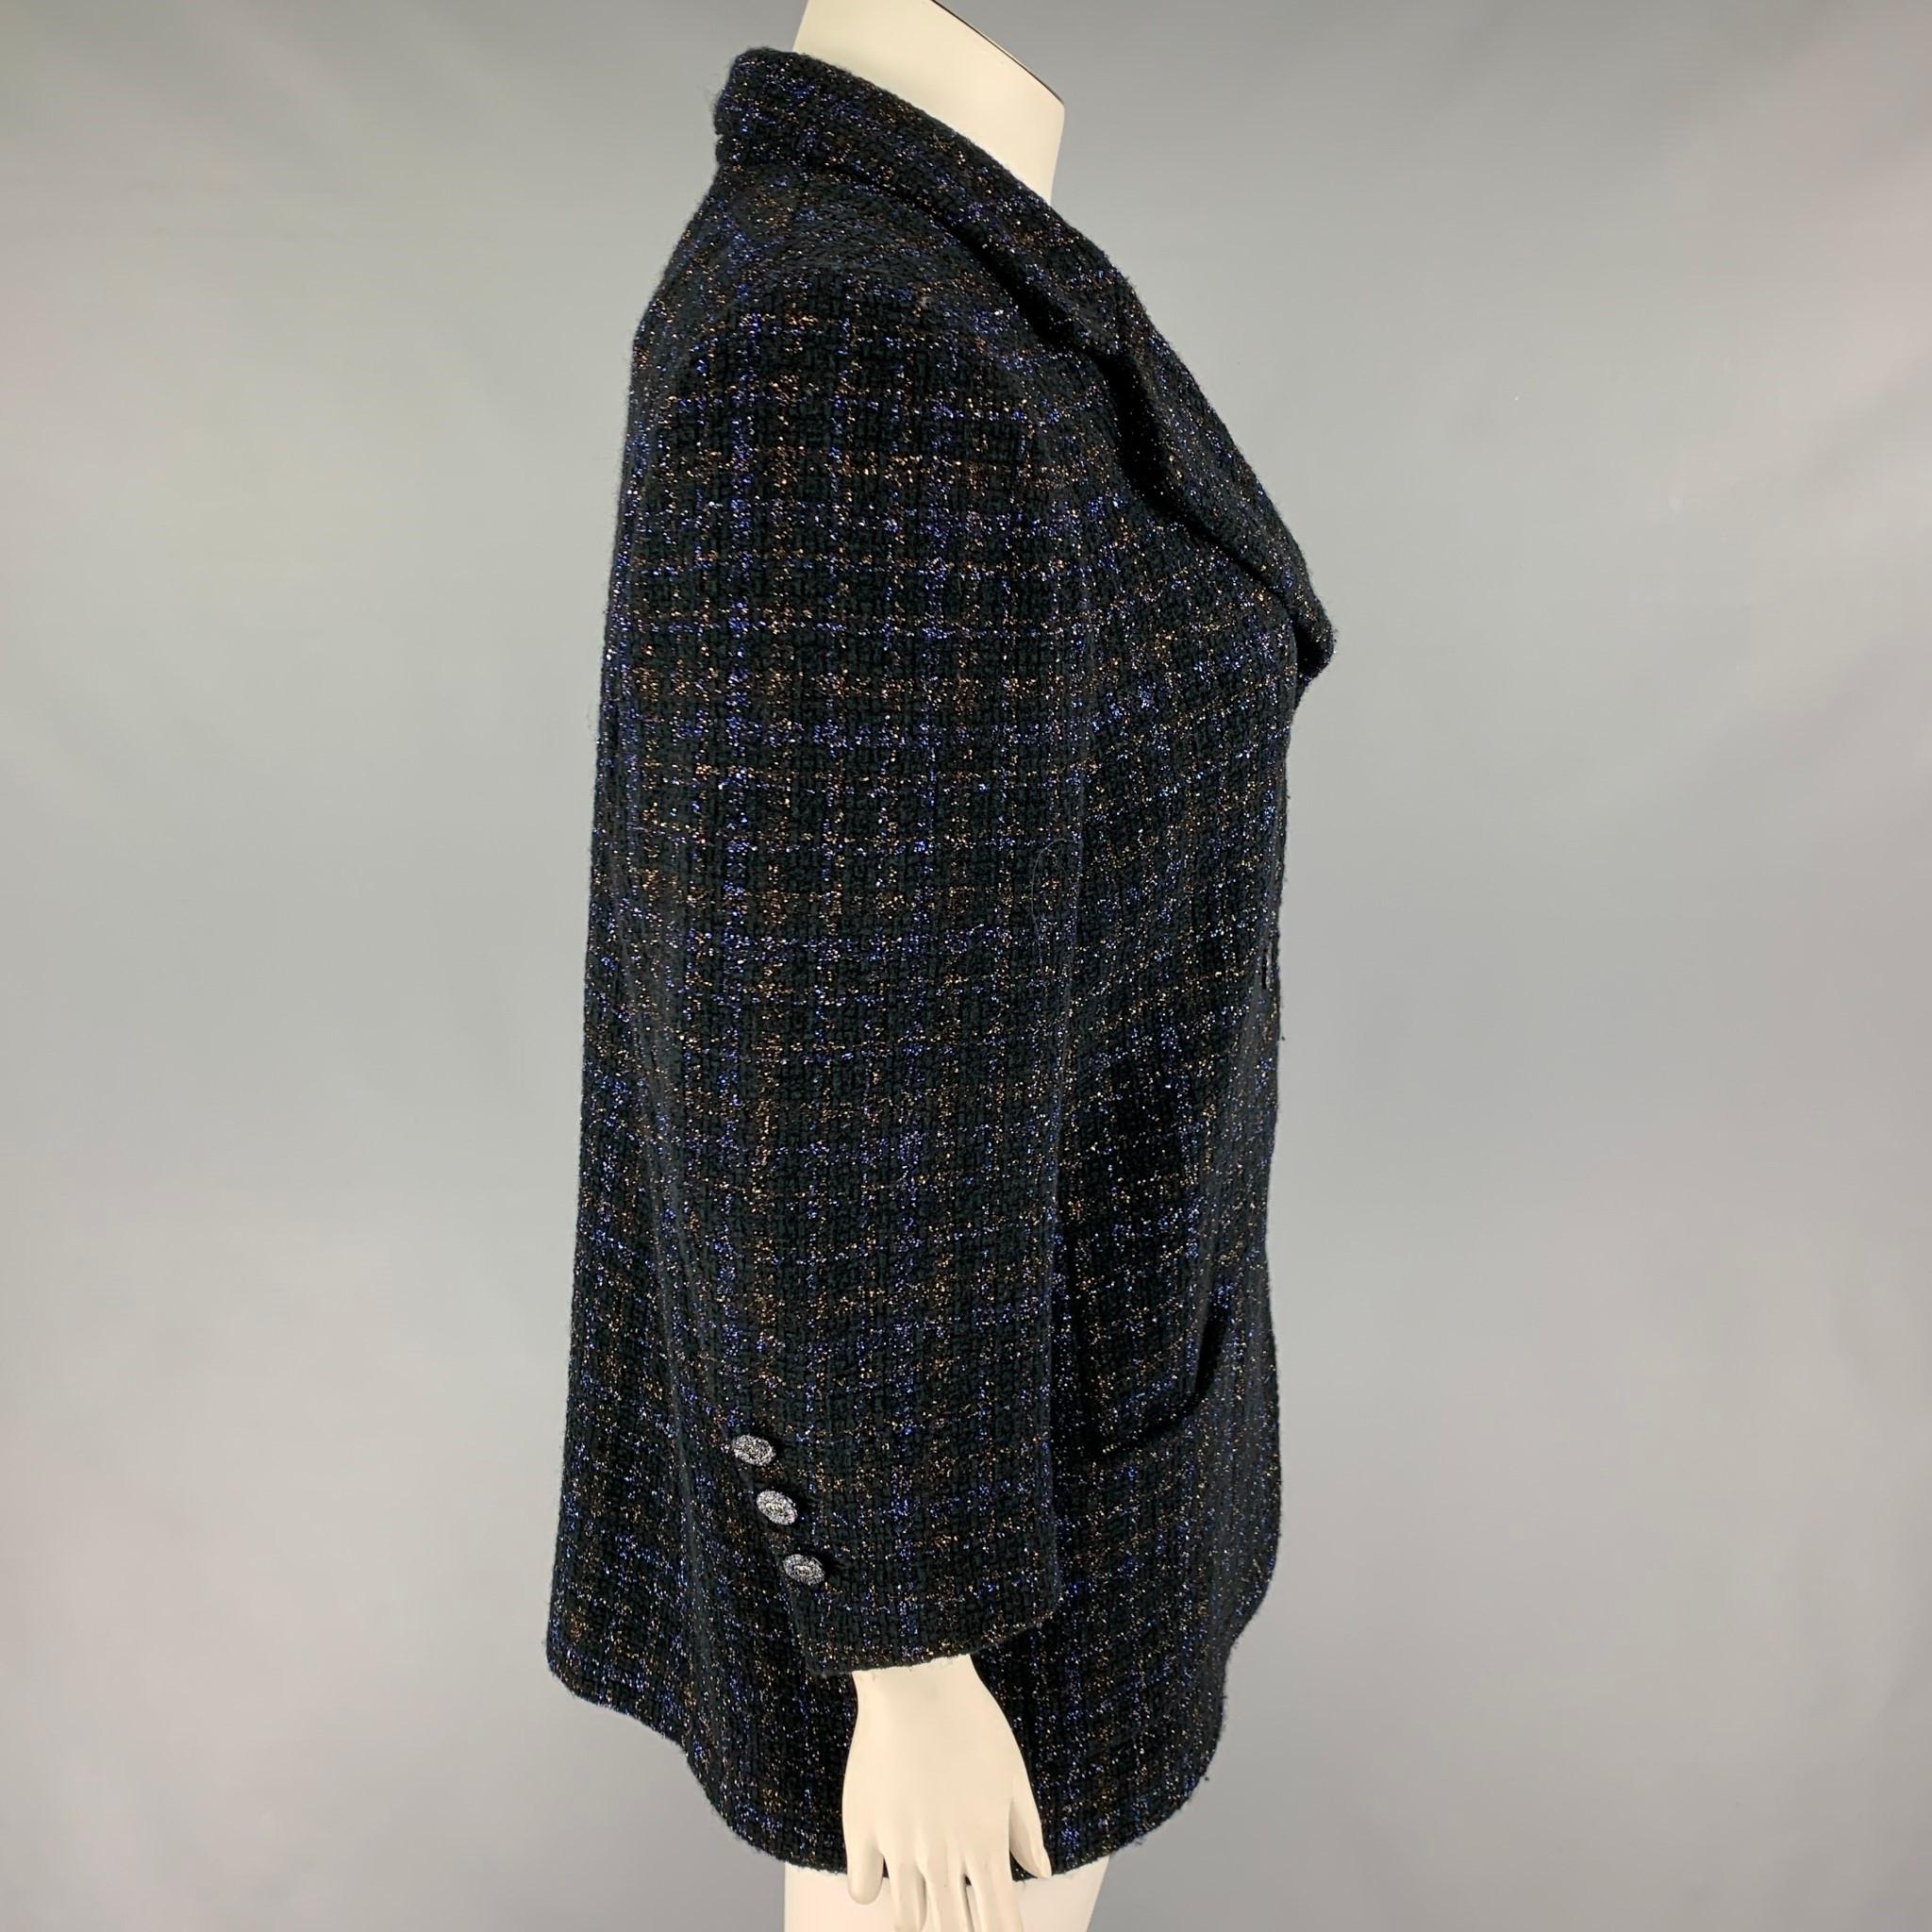 CHANEL coat comes in a navy & gold metallic boucle cotton blend with a full liner featuring a notch lapel, logo buttons, patch pockets, single back vent, and a three button closure. Made in France.

Excellent Pre-Owned Condition.
Marked: NF177 /